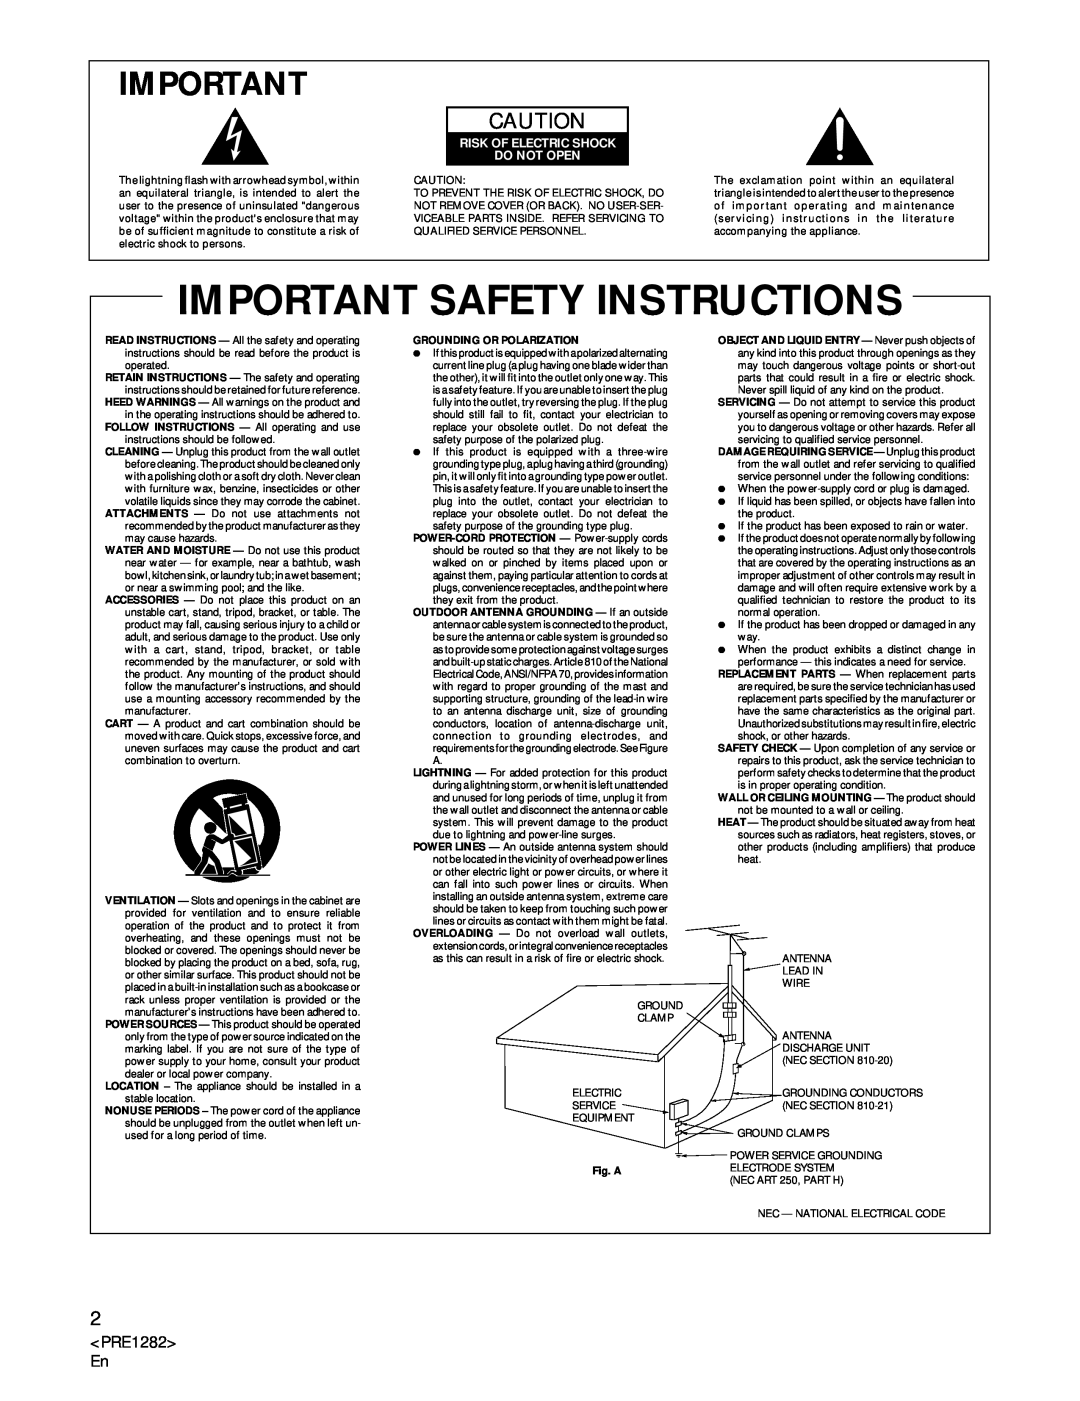 Americana Appliances CDR-850 manual Important Safety Instructions, <PRE1282> En, Risk Of Electric Shock Do Not Open 